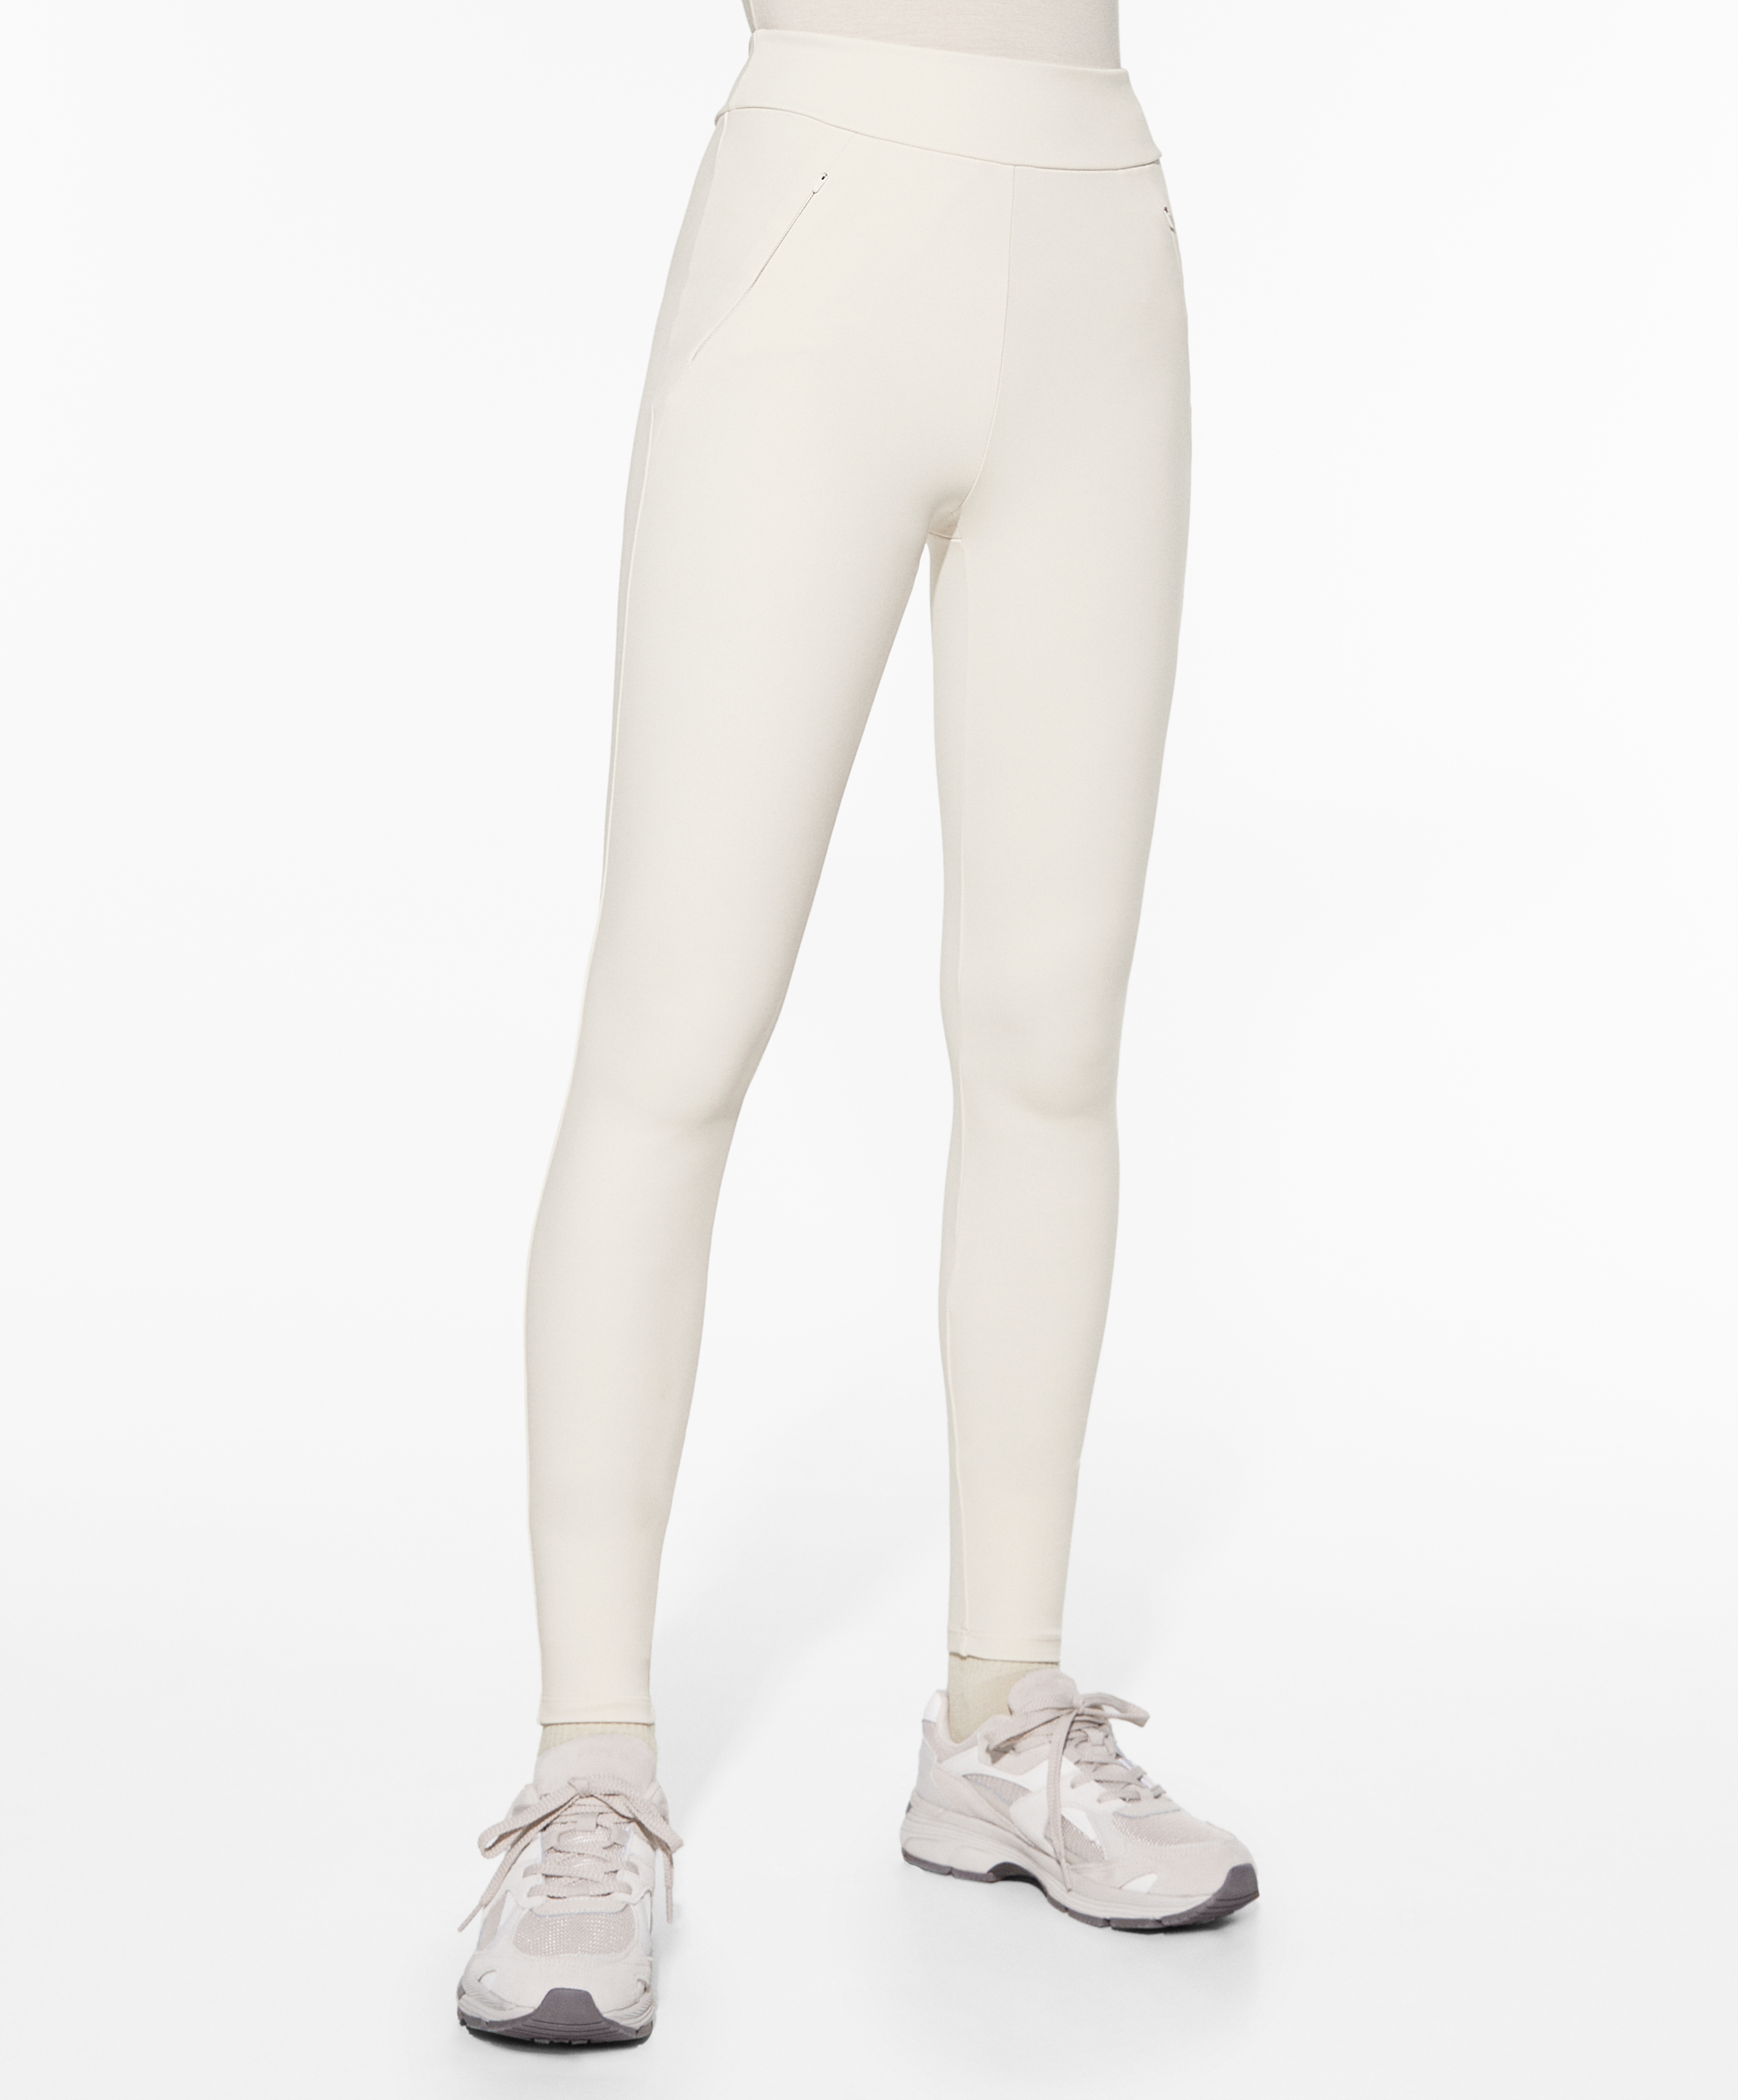 White Solid Ankle Length Plus Legging - VALLES365 by S.C. - 4144999